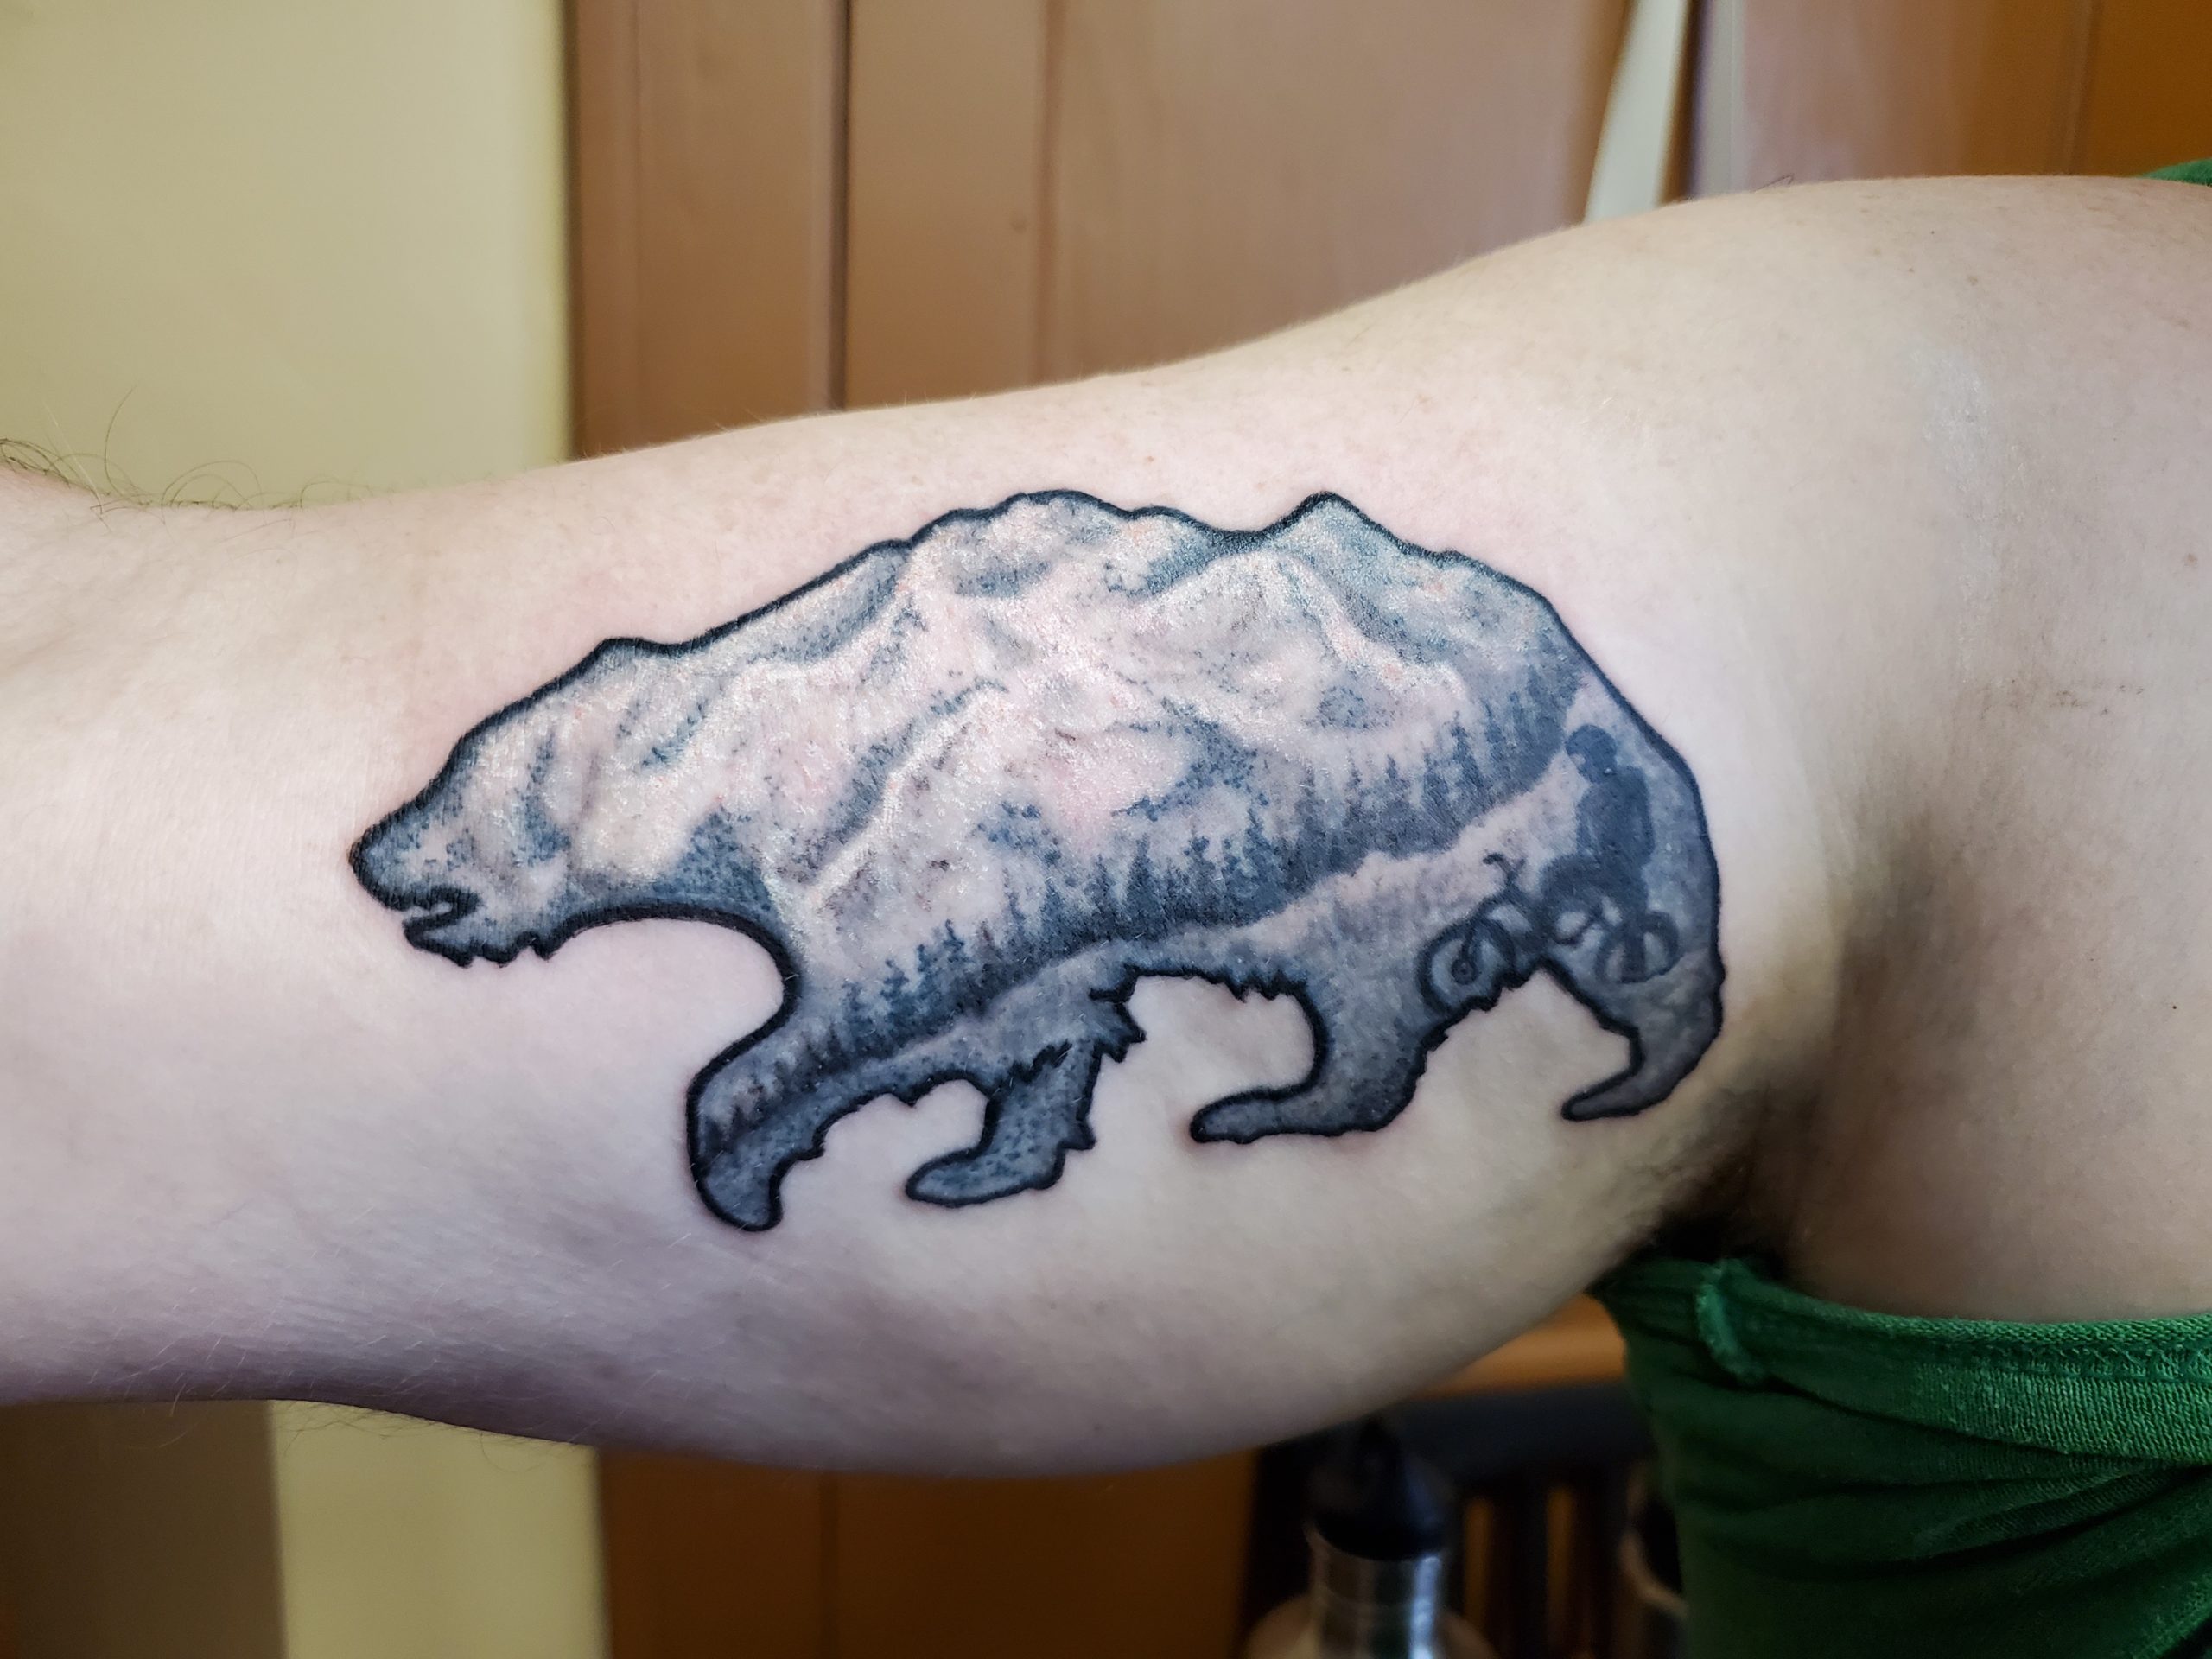 tattoo of bear image with black and gray style mountains and trees